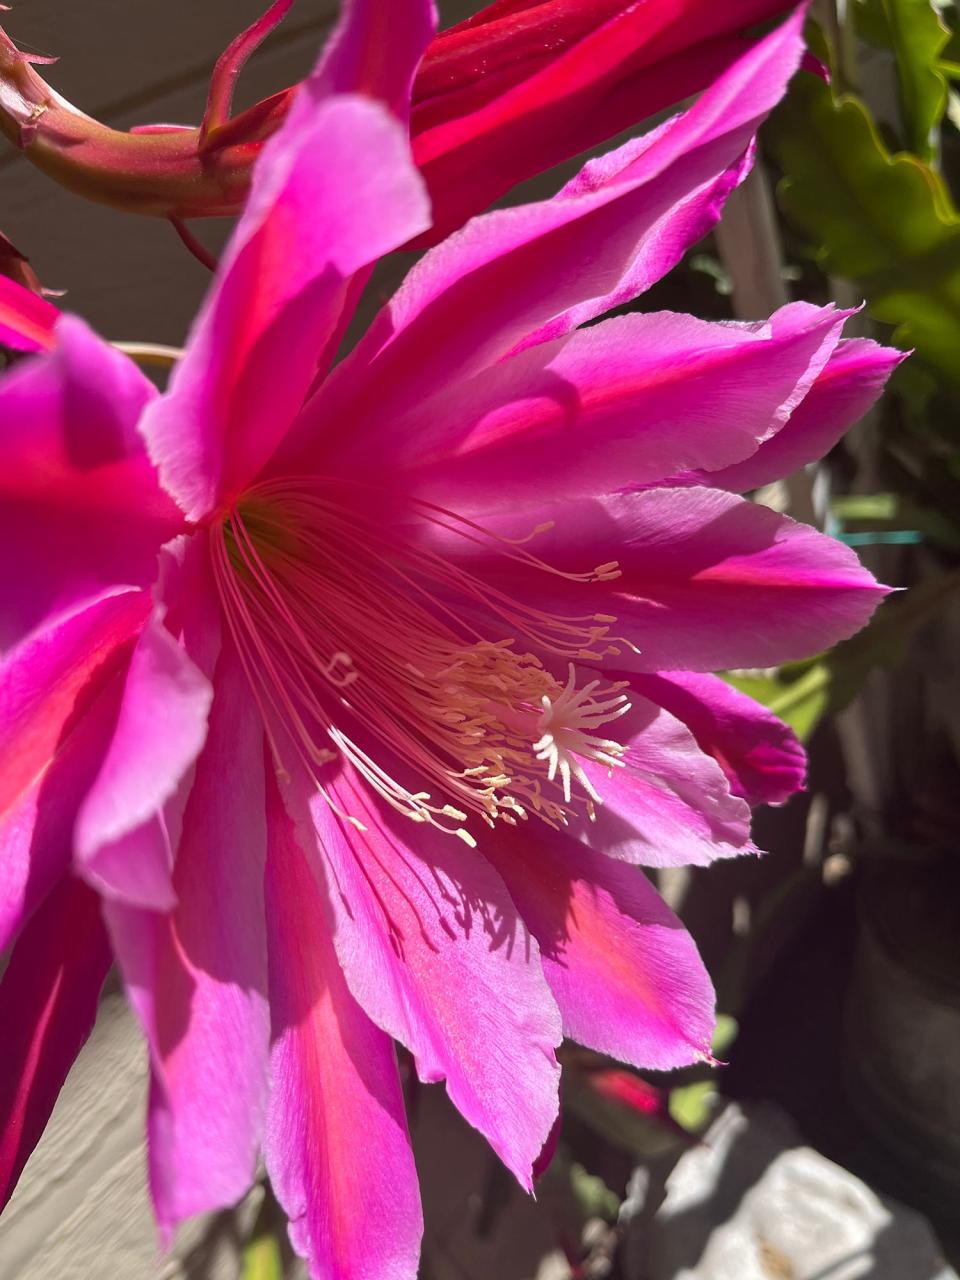 Carol Biggs of Stockton used an Apple iPhone 13 to photograph a Christmas cactus blossom in her neighbor's garden.